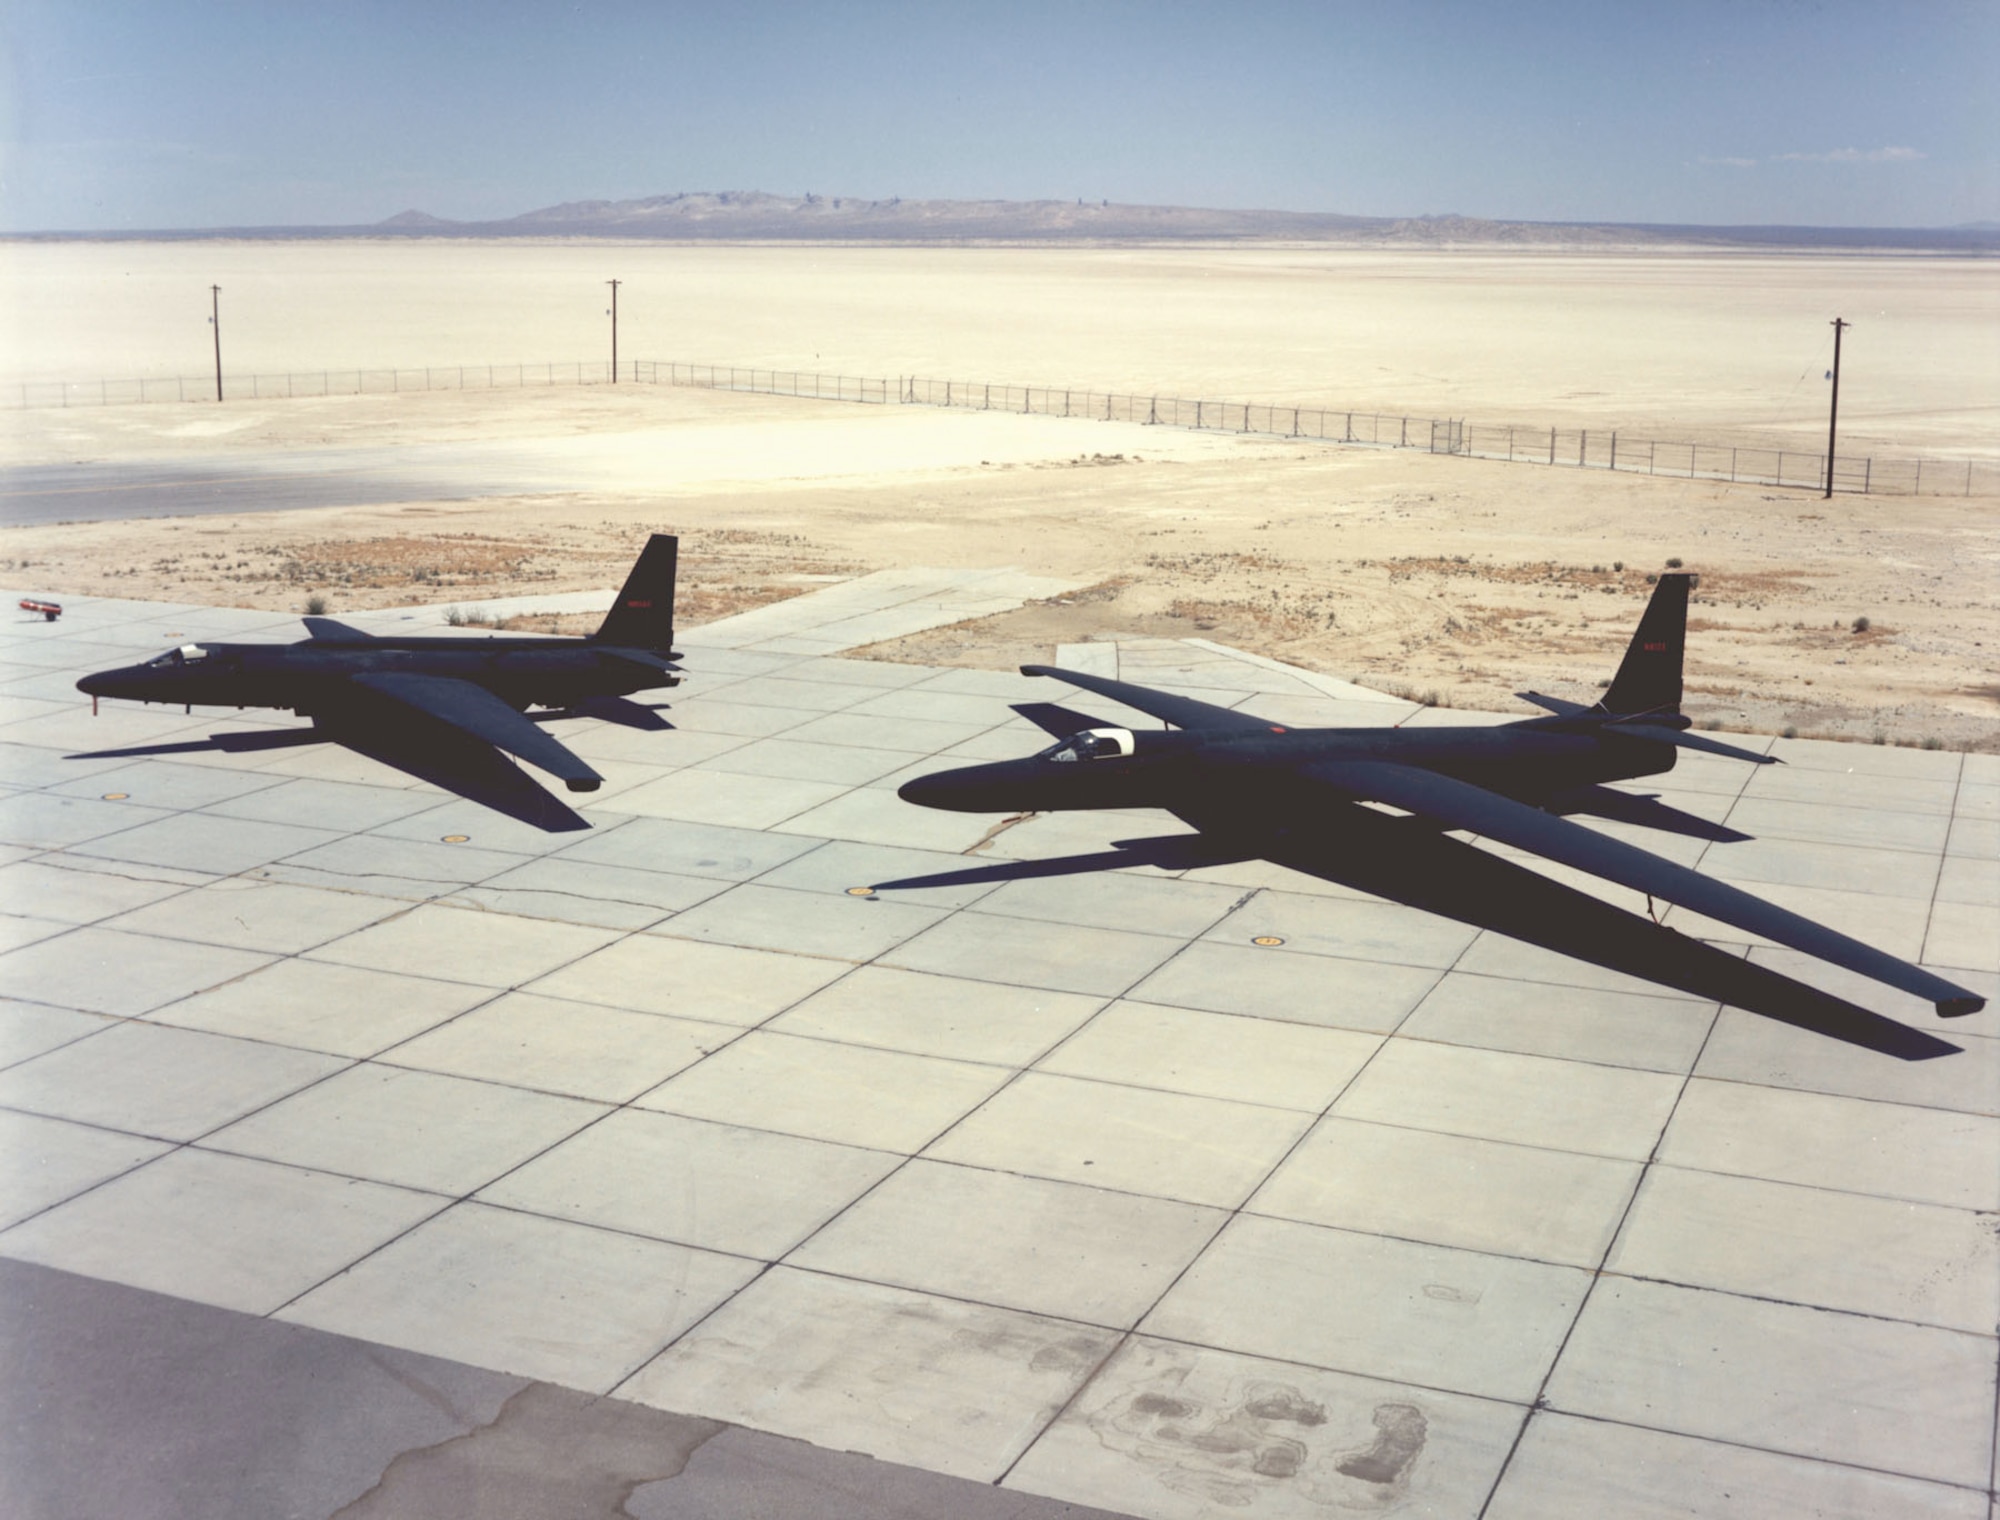 The U-2R, introduced in 1967, was significantly larger than the original U-2. Its wingspan was 103 feet compared to 80 feet in the original design, and the new aircraft took advantage of a more powerful engine. Its range and endurance also were greater. (U.S. Air Force photo)